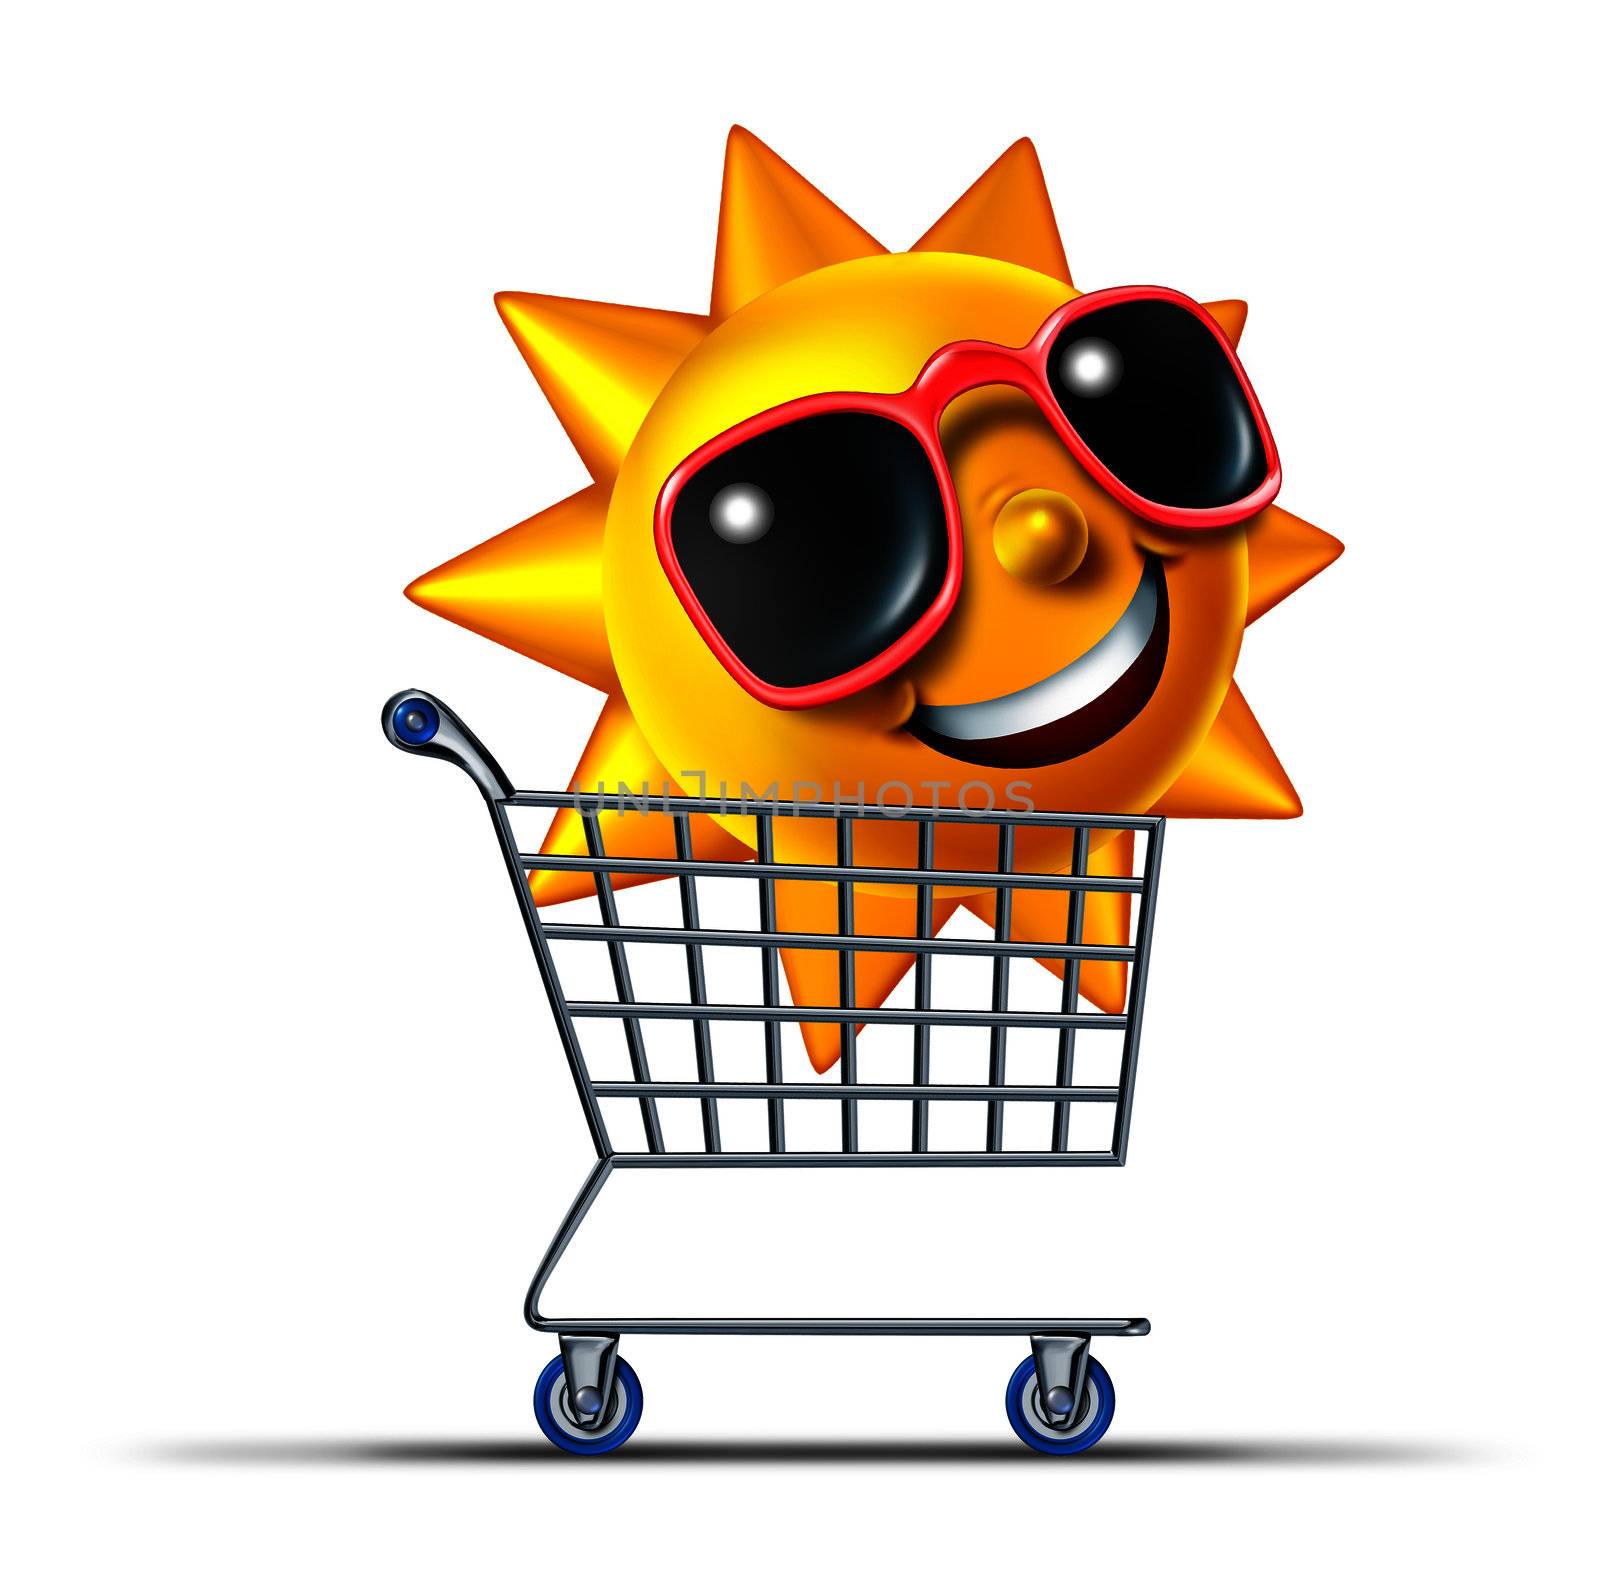 Vacation business tourism concept with a shopping cart and a fun summer sun character with sunglasses traveling to a hot destination for relaxation and leisure rest as a symbol of internet travel booking.